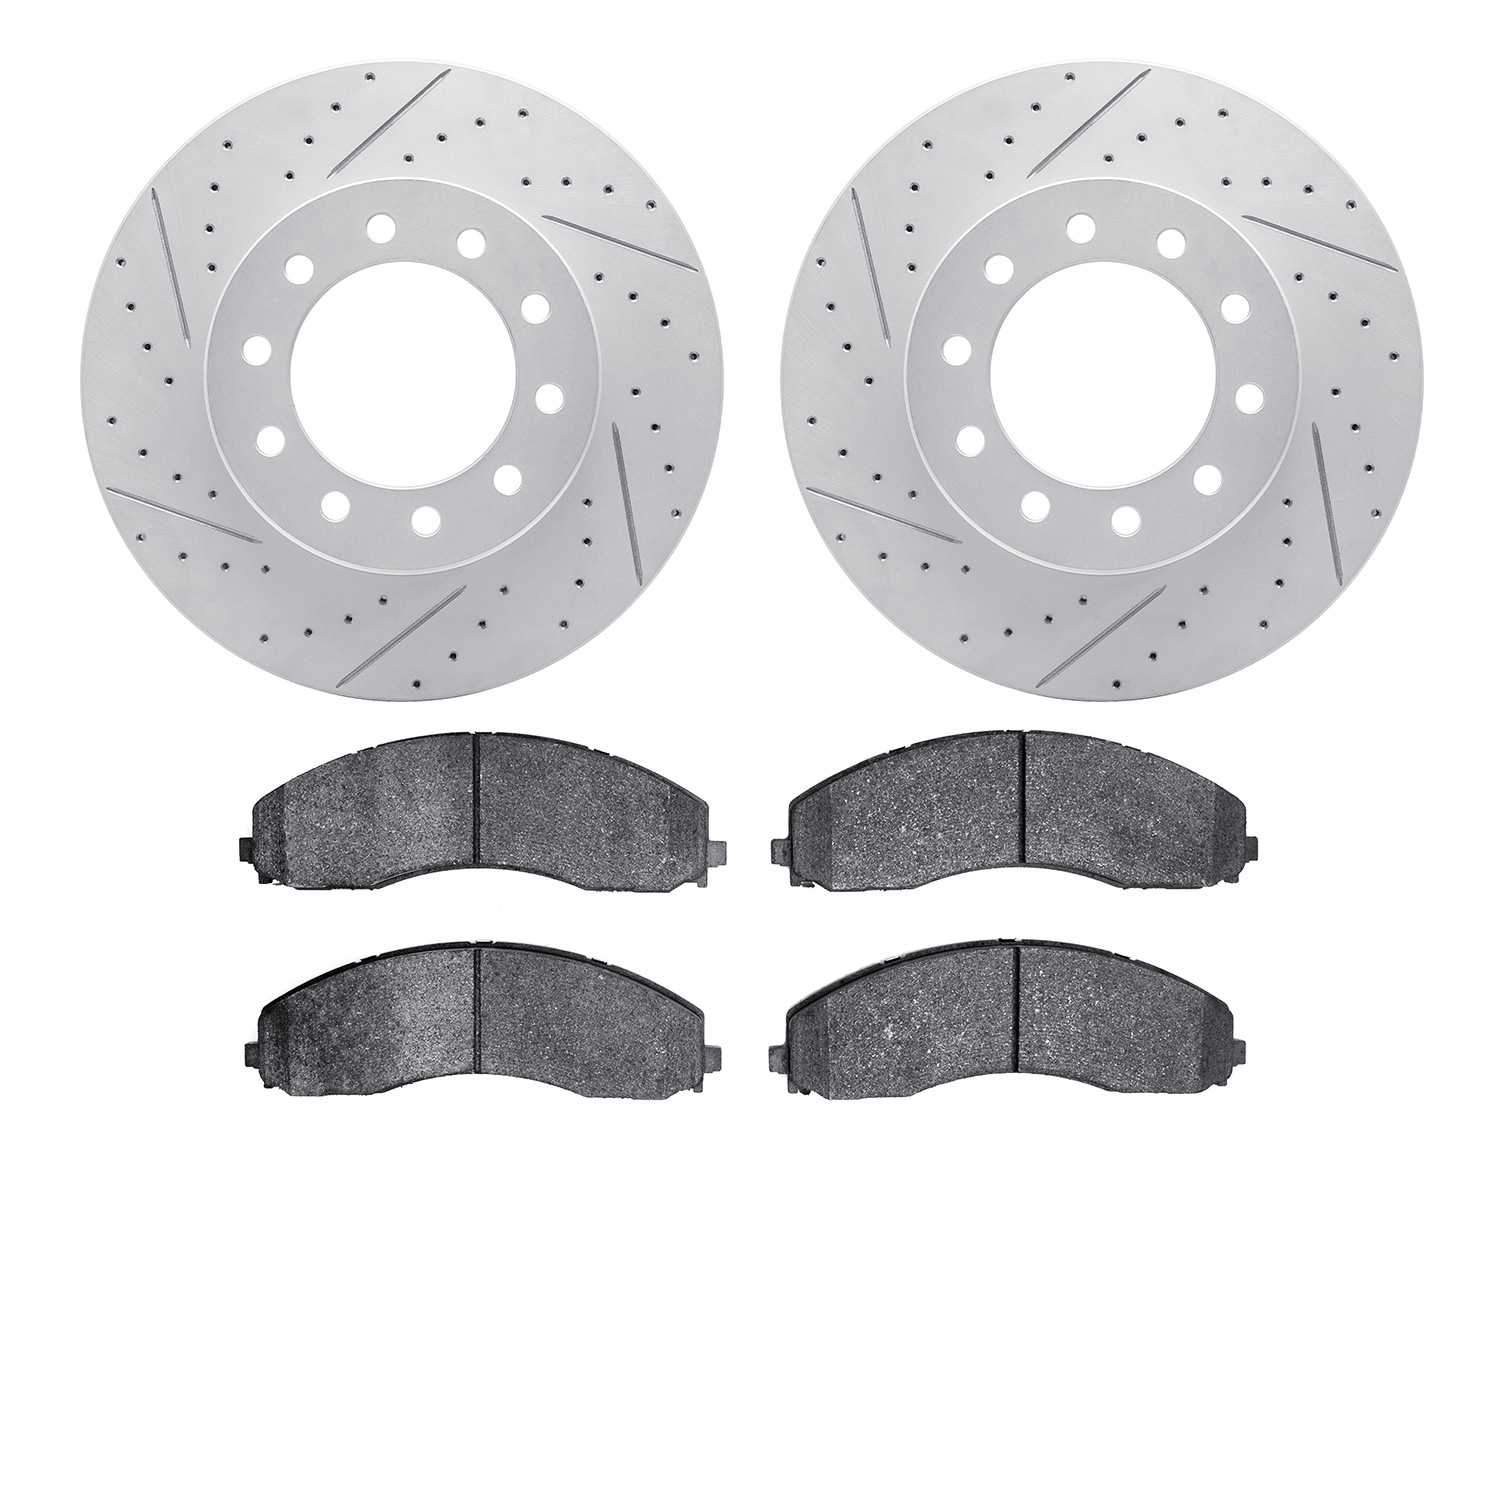 2202-99203 Geoperformance Drilled/Slotted Rotors w/Heavy-Duty Pads Kit, Fits Select Ford/Lincoln/Mercury/Mazda, Position: Front